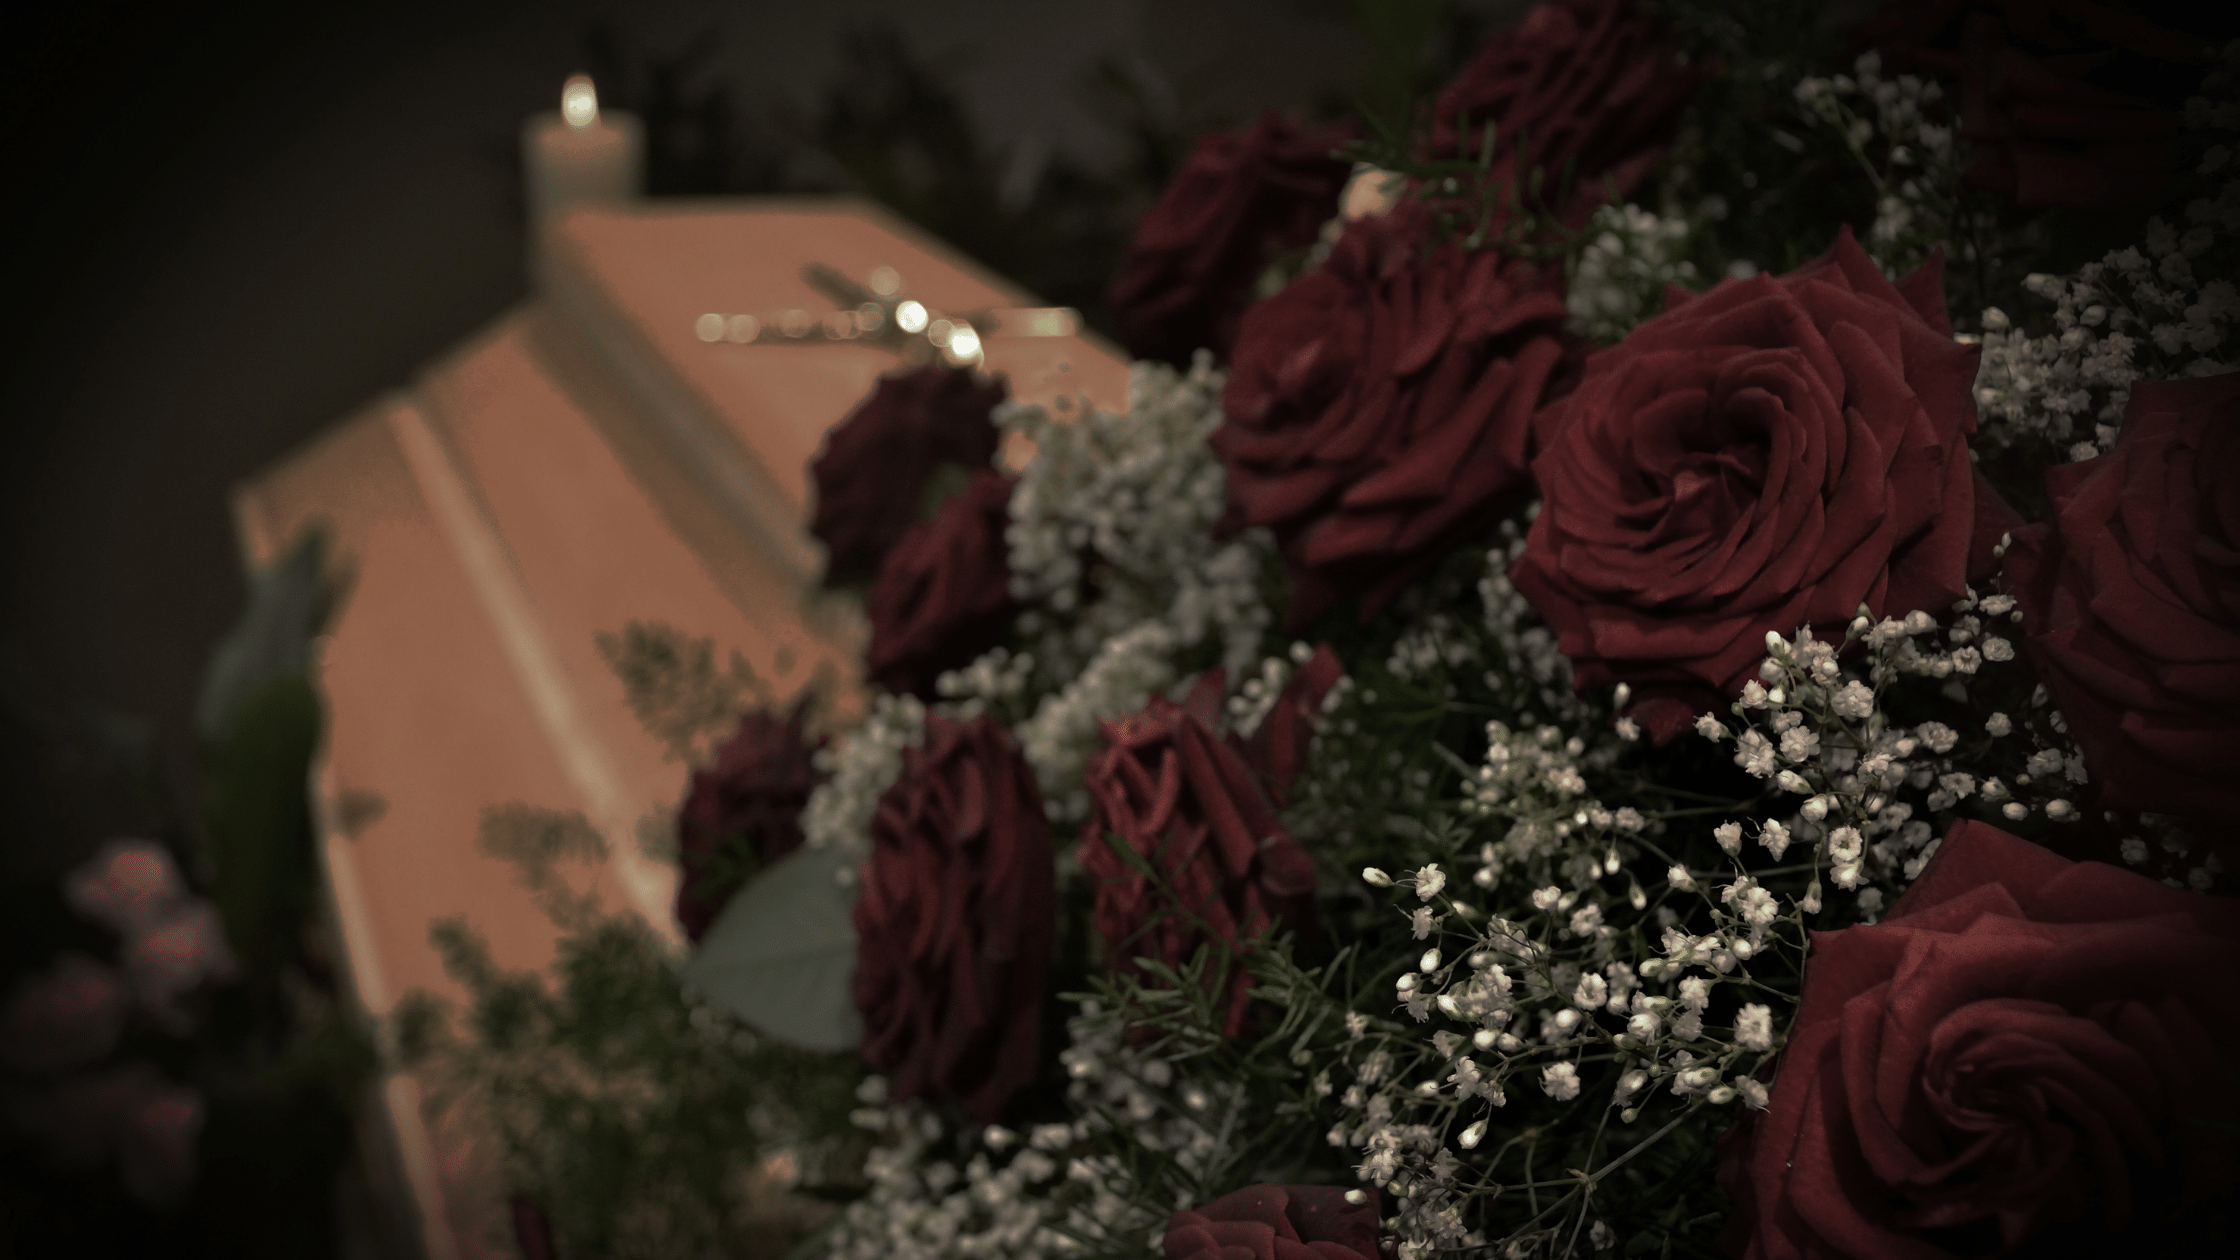 8 Questions You Should Ask to a Funeral Director